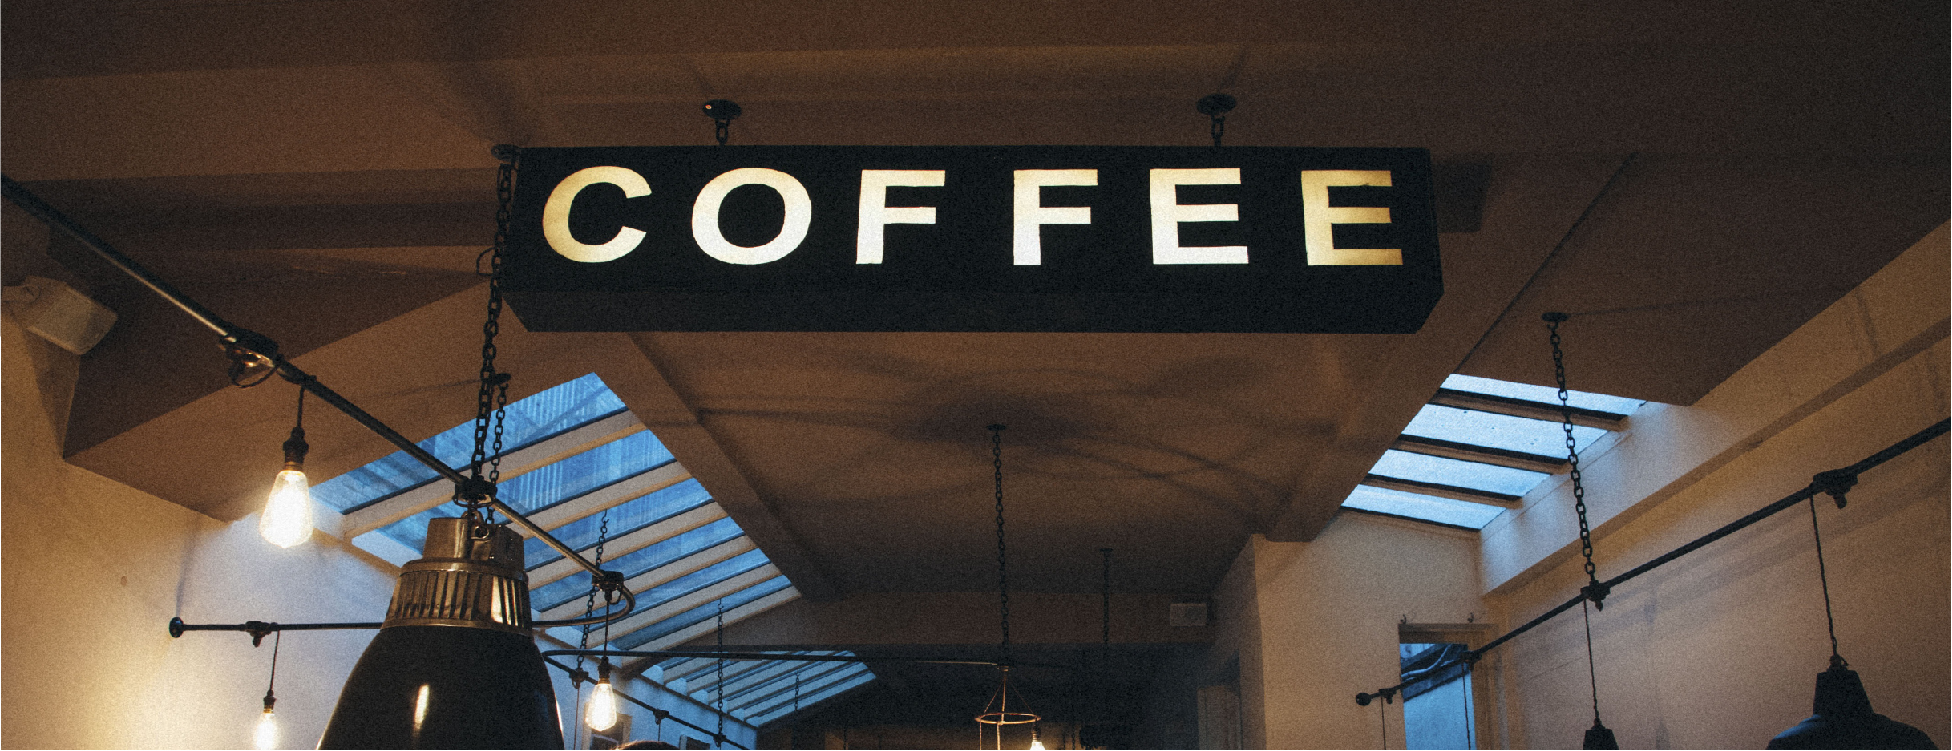 Sign in Coffee Shop that says 'Coffee'